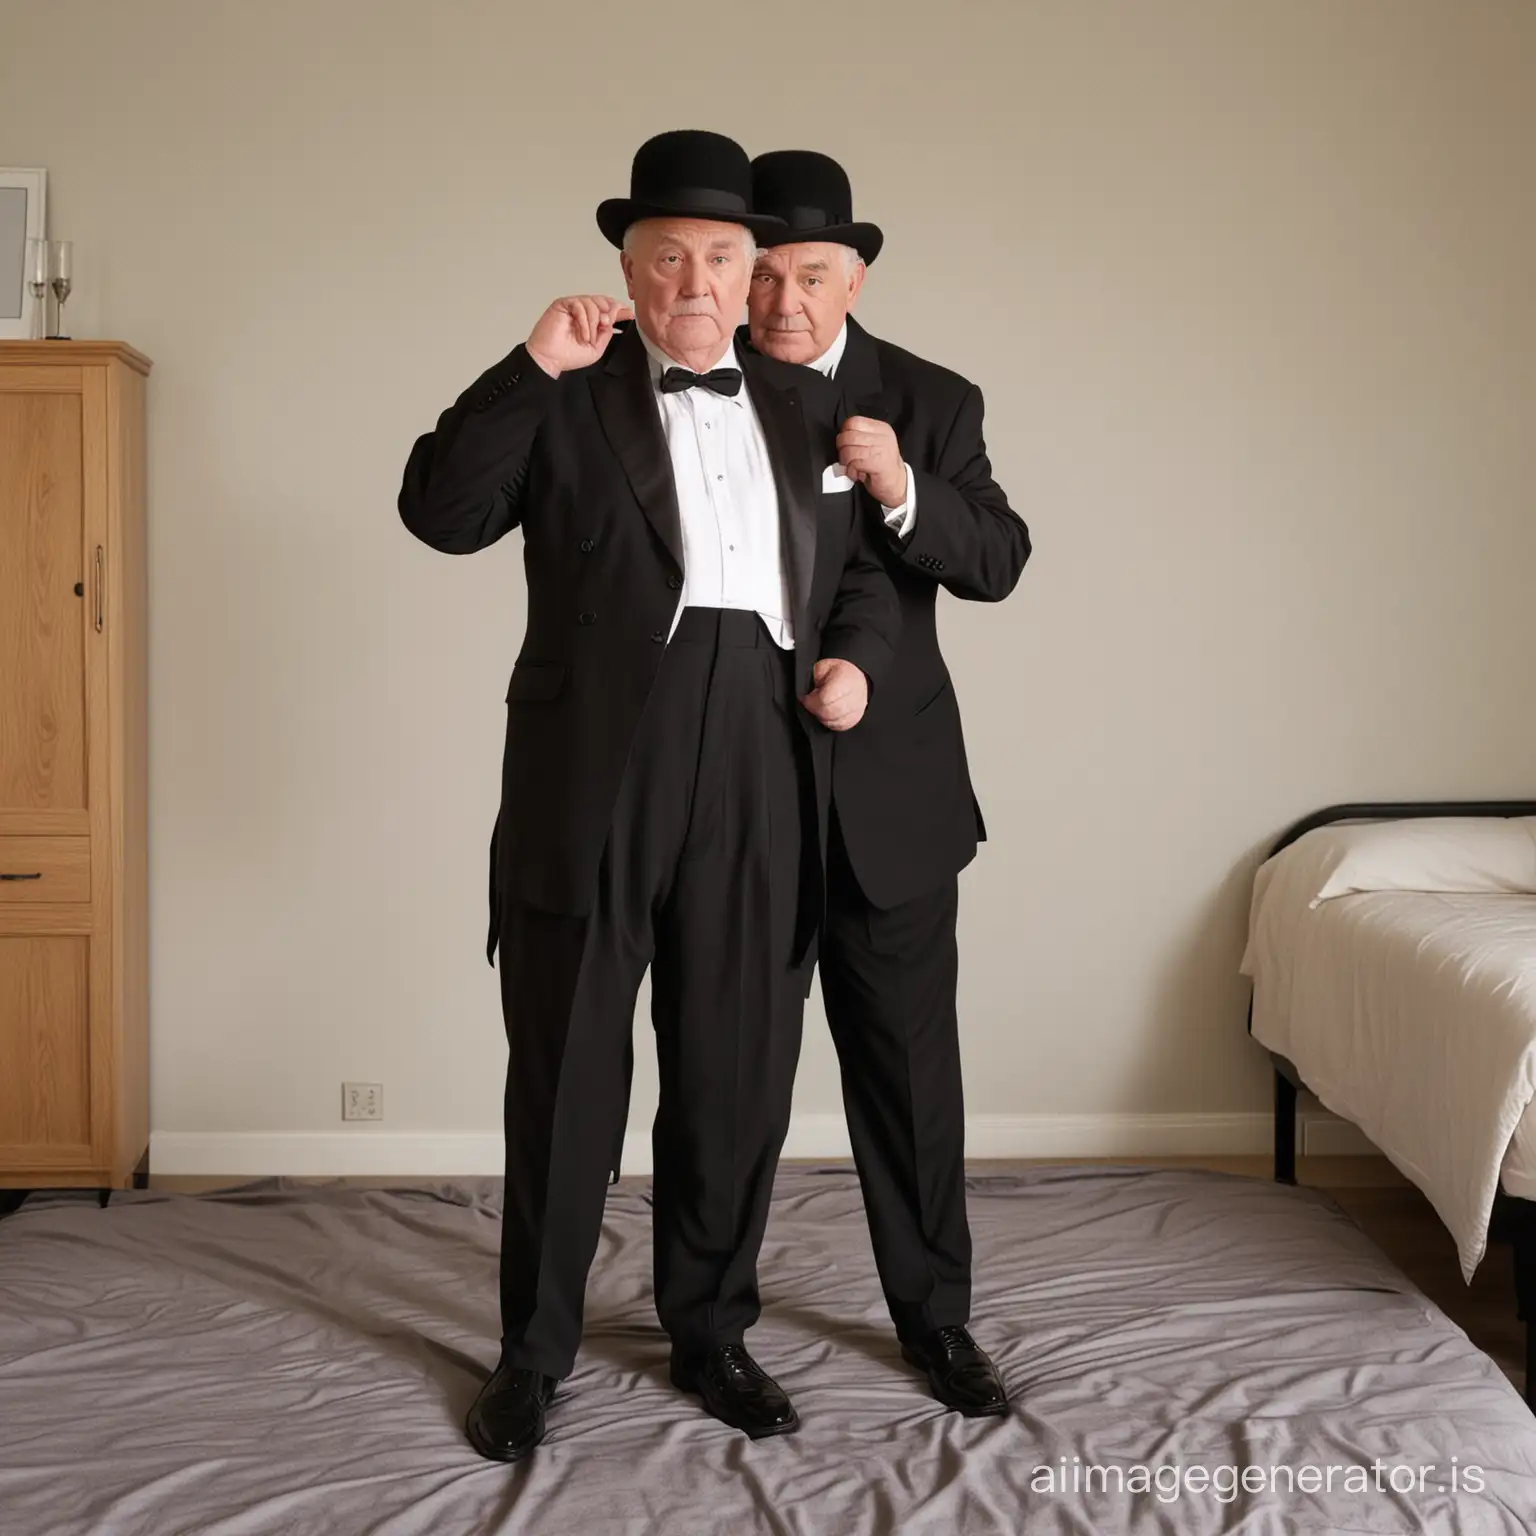 Two white fat elderly men, both 80 years old, shot height, wearing black hats, black tuxedos, black bowties, black socks, black loafers, black hair, fondling each other in the bedroom, full body shot, must show face